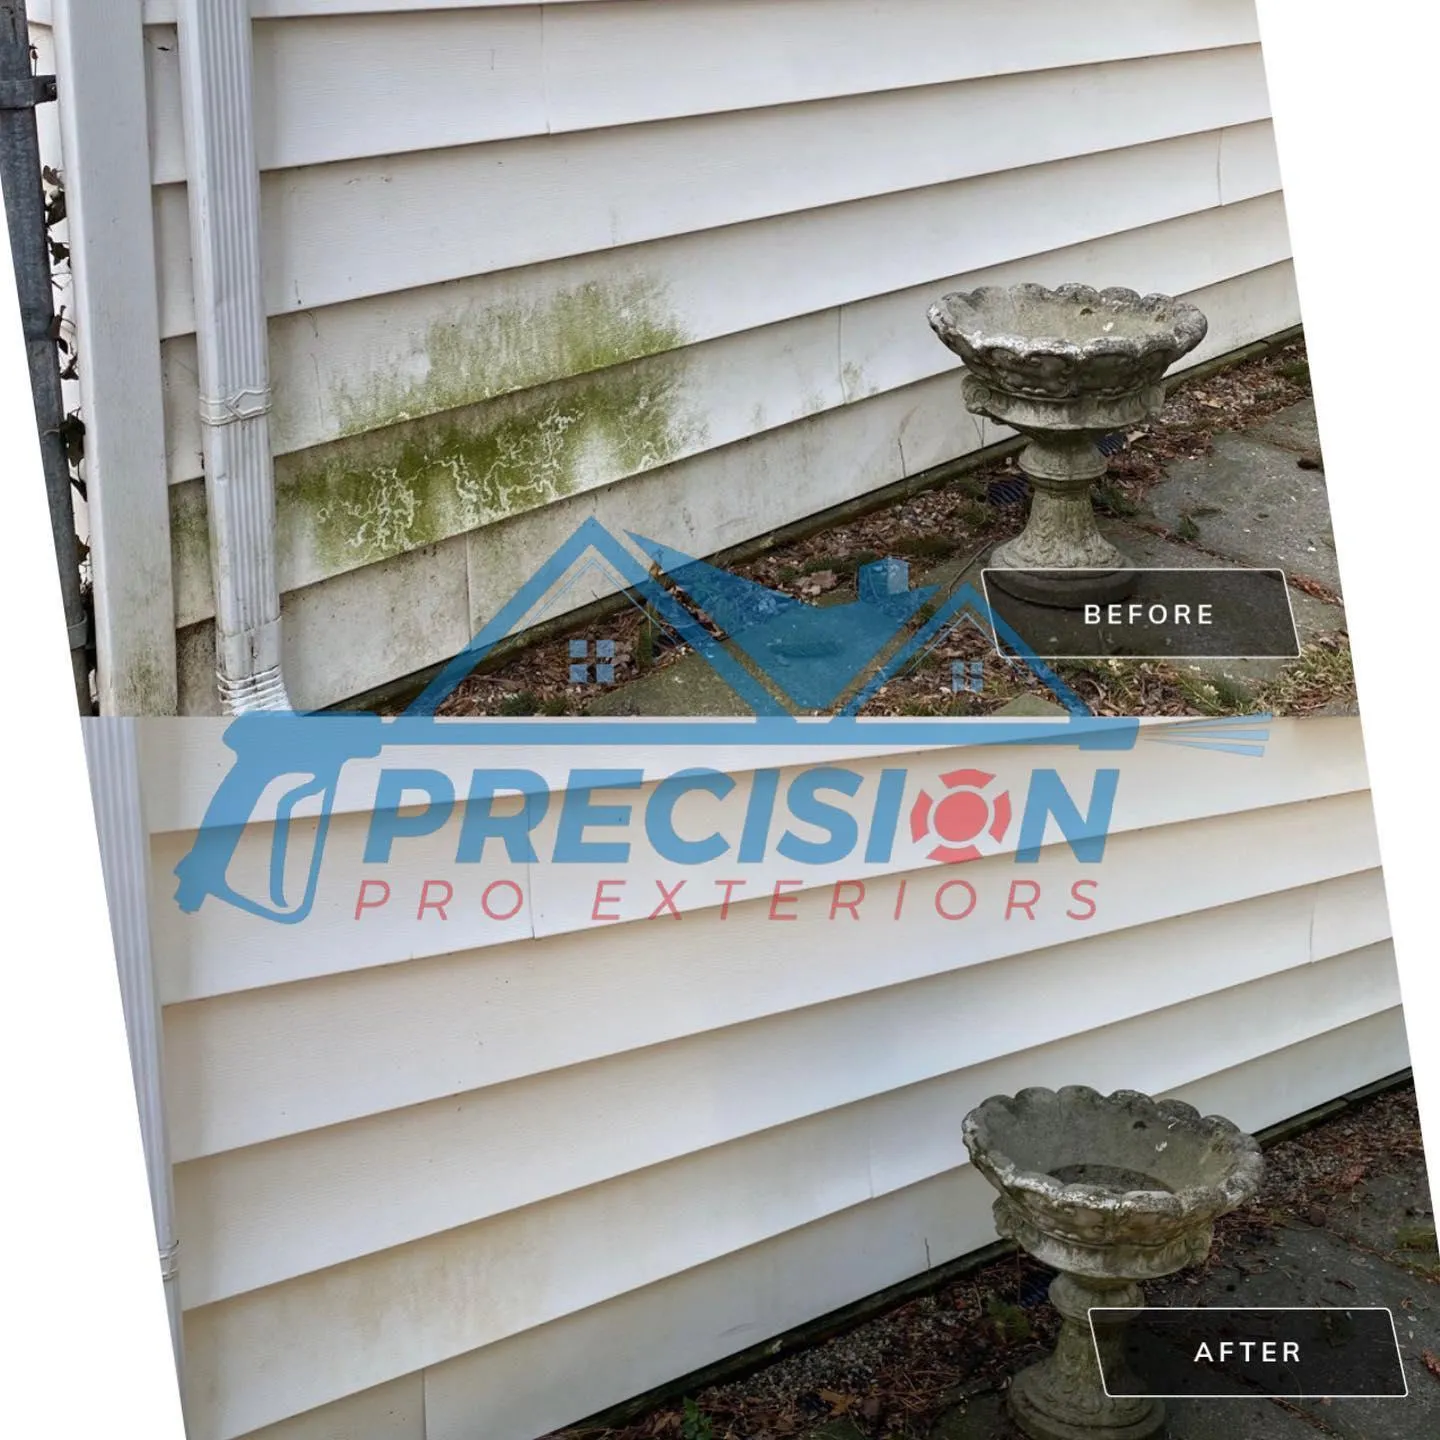 House Washing for ProTech Pressure Wash LLC in Clinton Township, MI